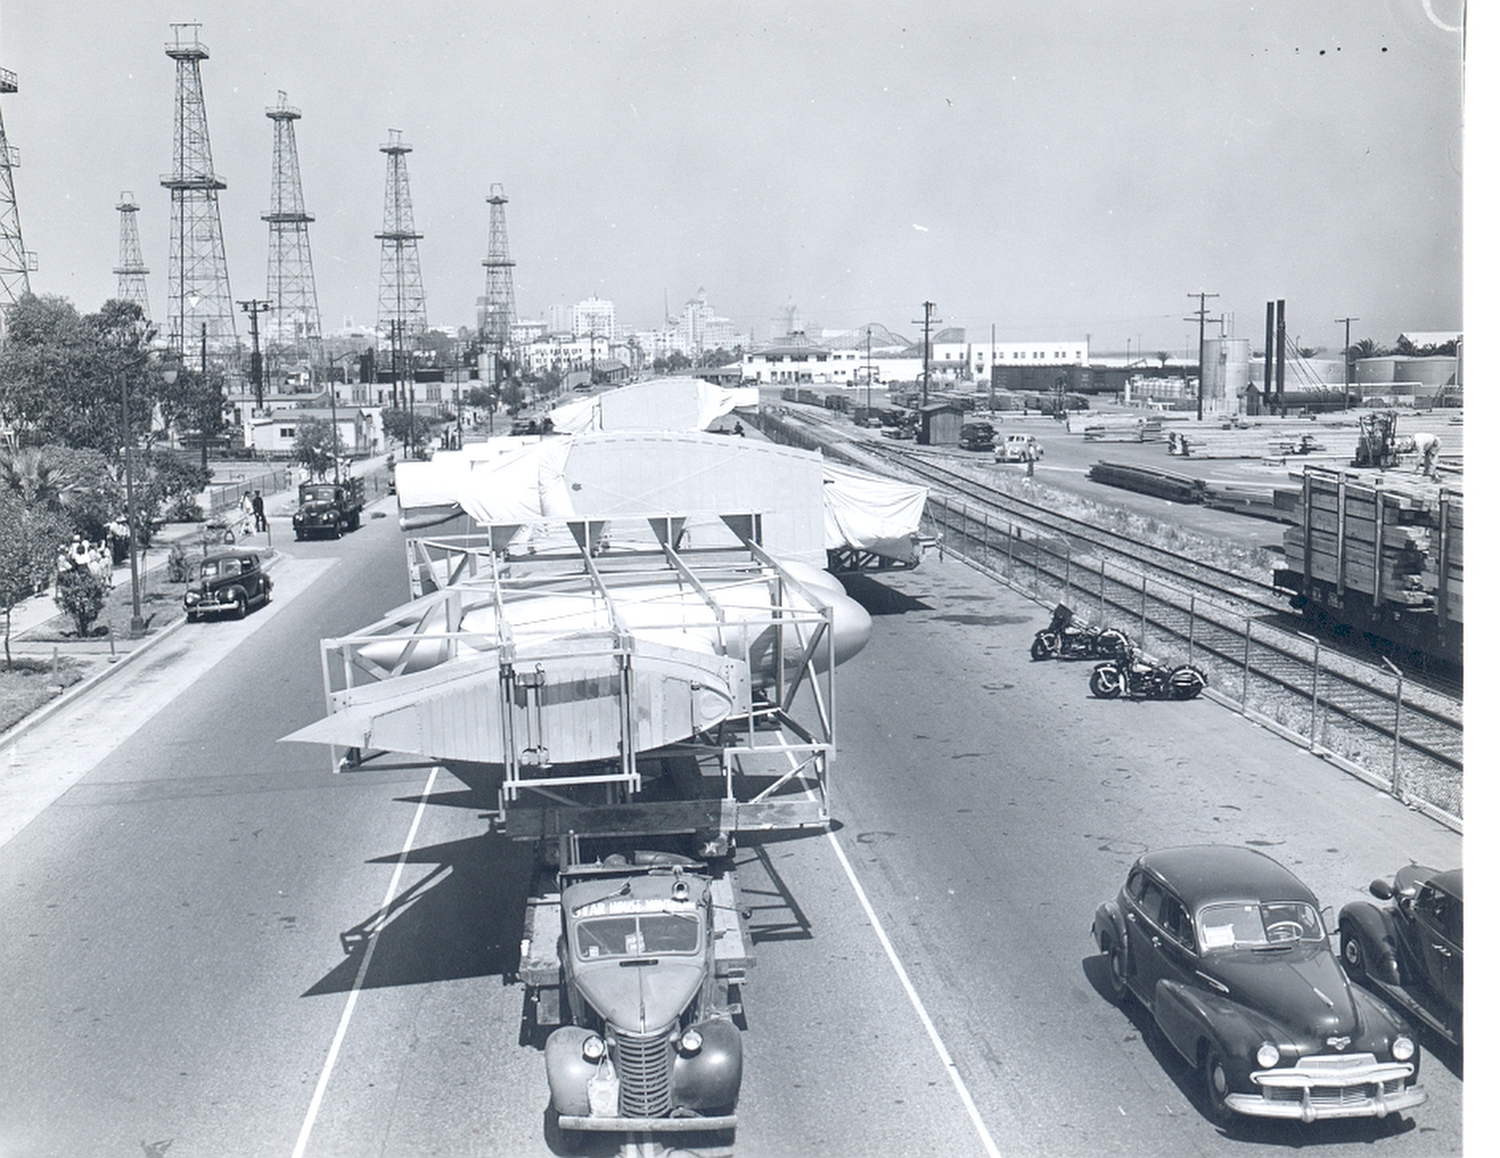 Pieces of the Spruce Goose head down Santa Fe Avenue on their journey from Culver City to Long Beach in 1946.